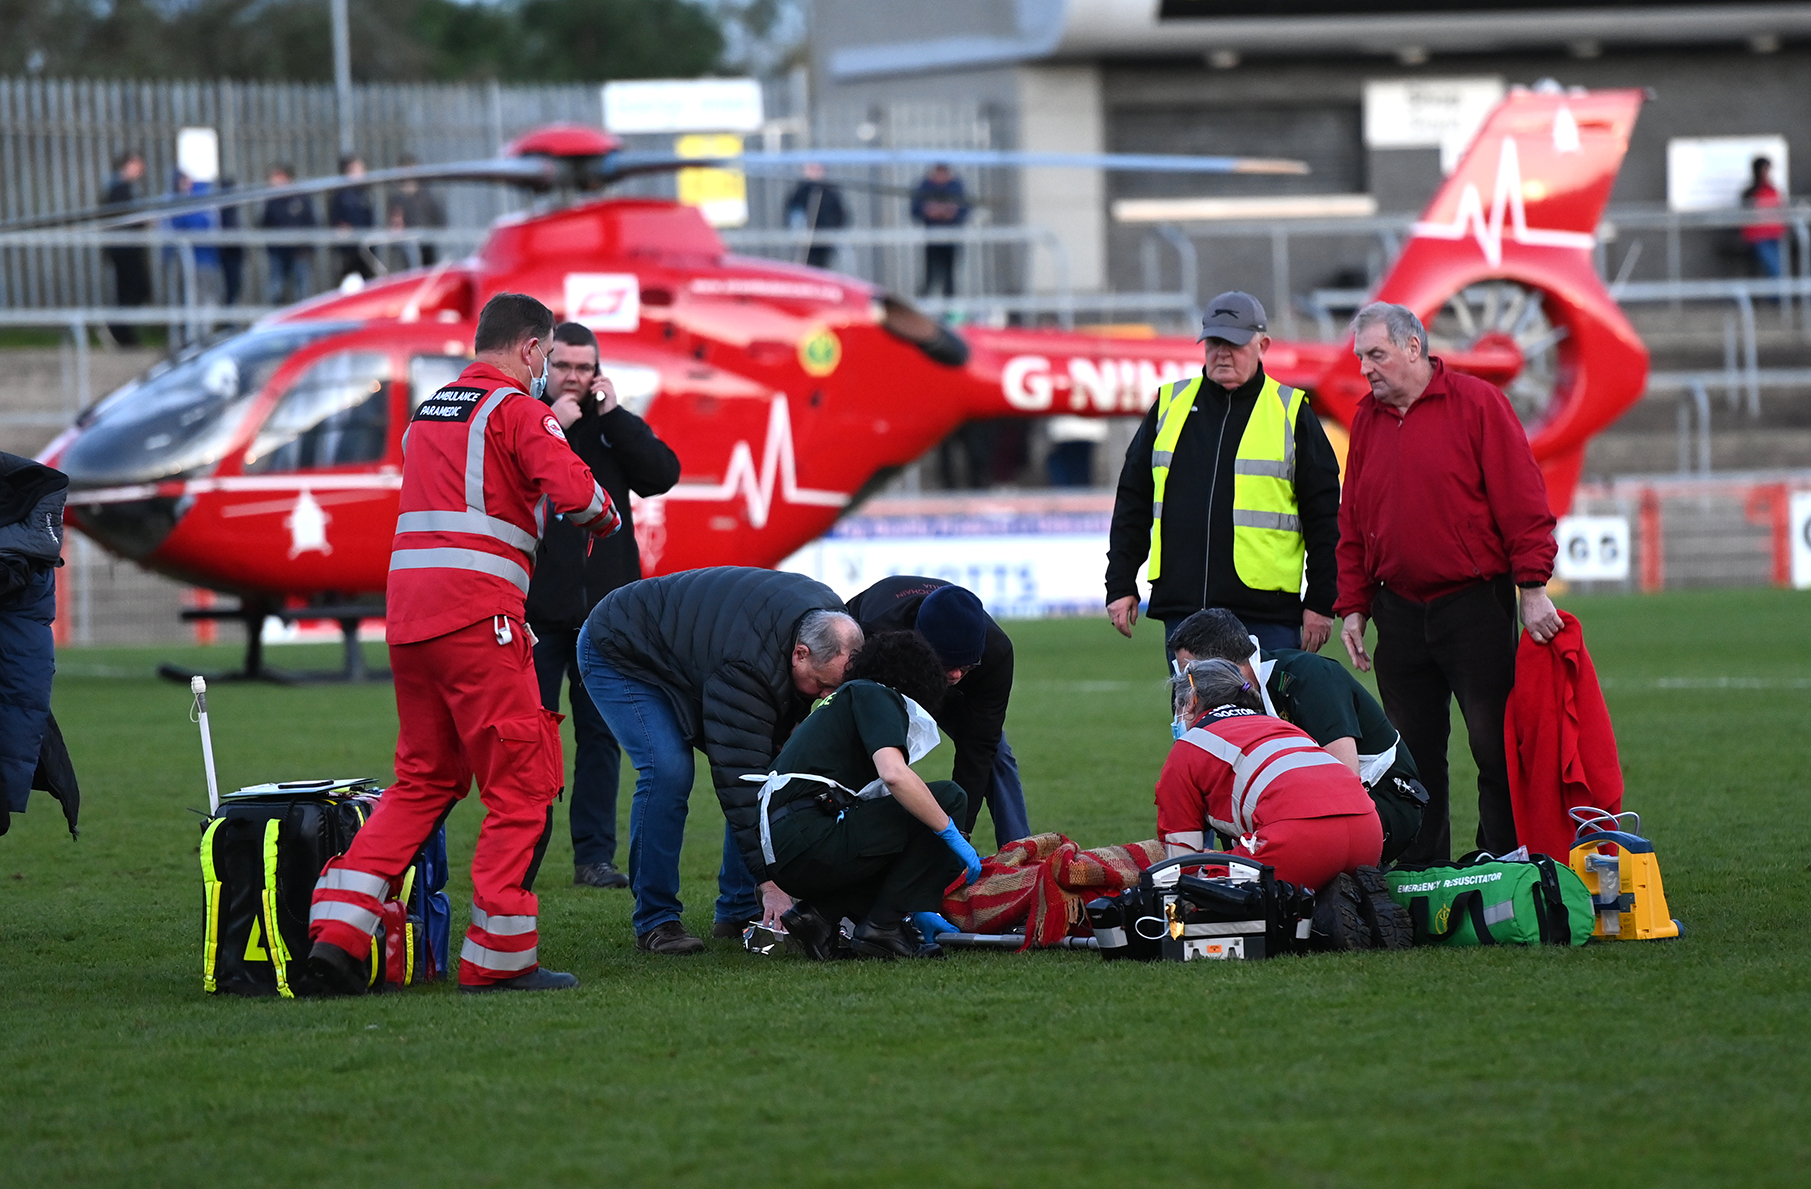 Match abandoned after serious injury